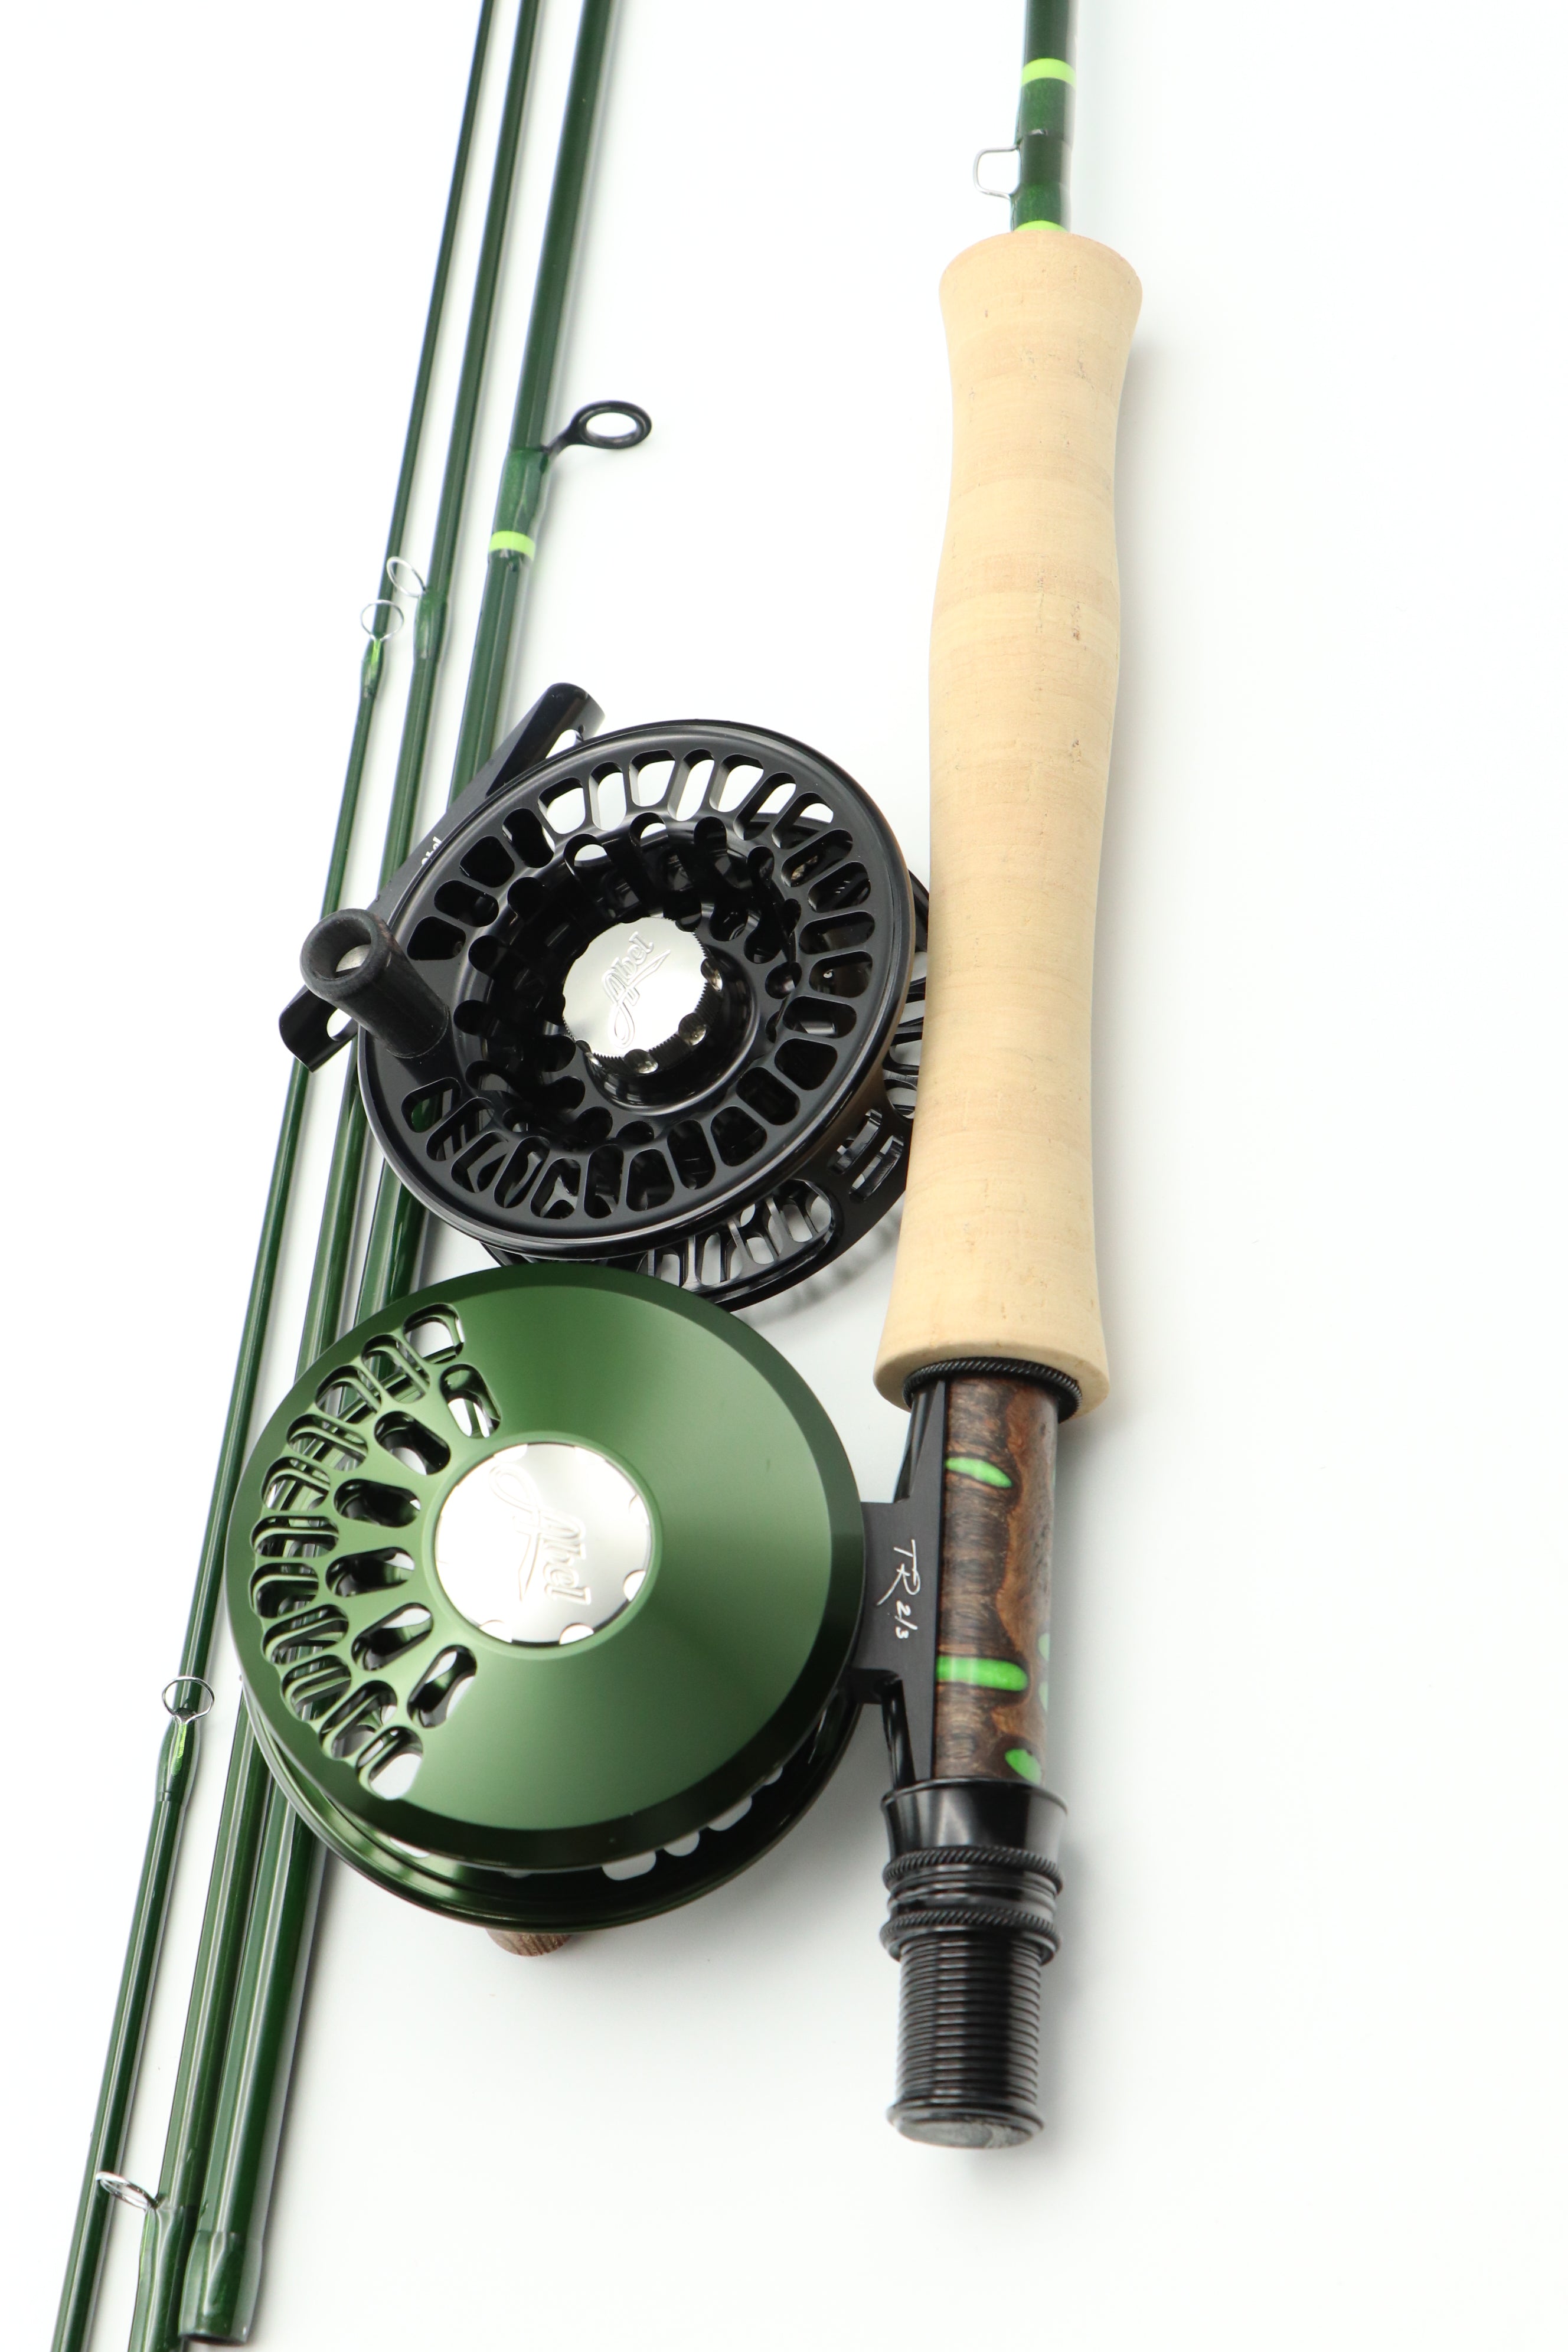 Coherence 7 foot 6 inch 4 weight 4 piece combo – JP Ross Fly Rods